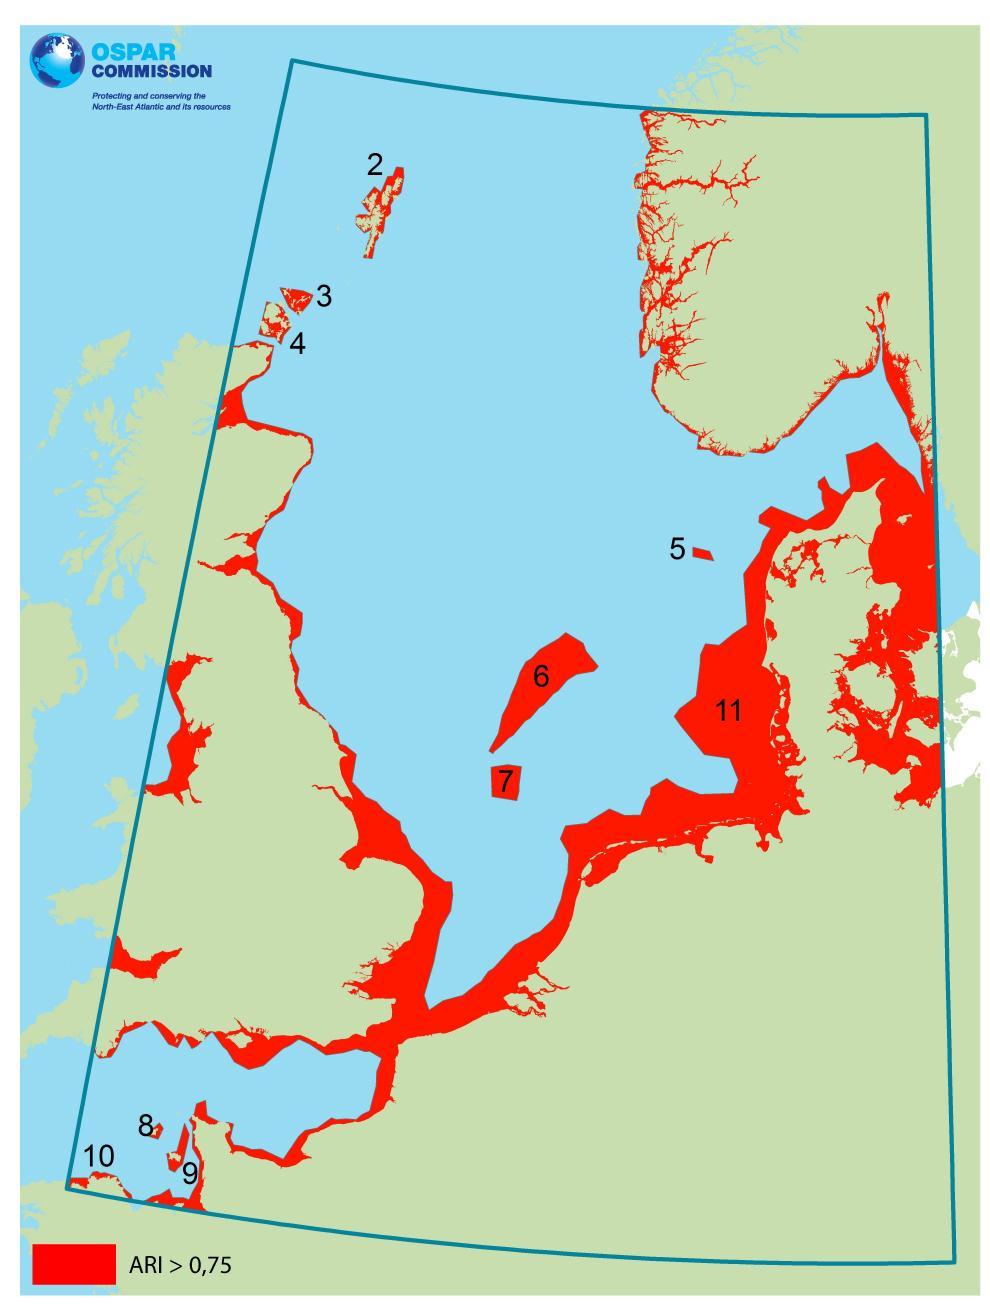 Annex, page 5 Annex 2 Map of the area average risk index ARI in the North Sea The area with the risk index ARI of 0.75 and above is depicted in red.